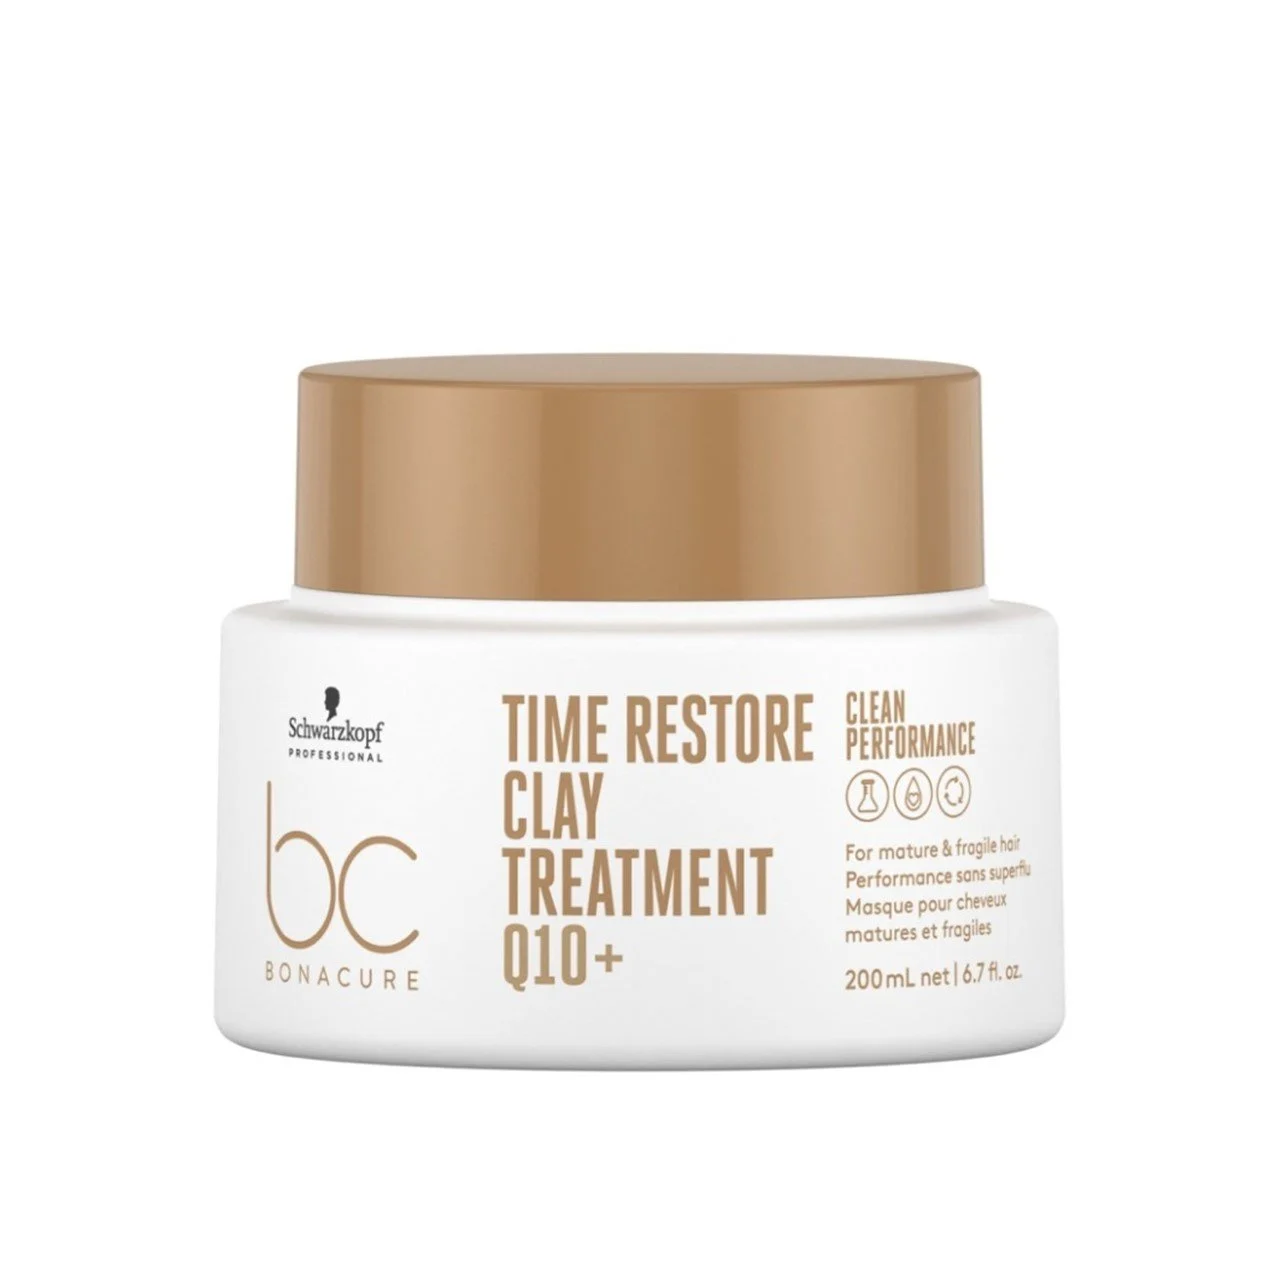 schwarzkopf-bc-q10-time-restore-clay-treatment-mask-clean-performance